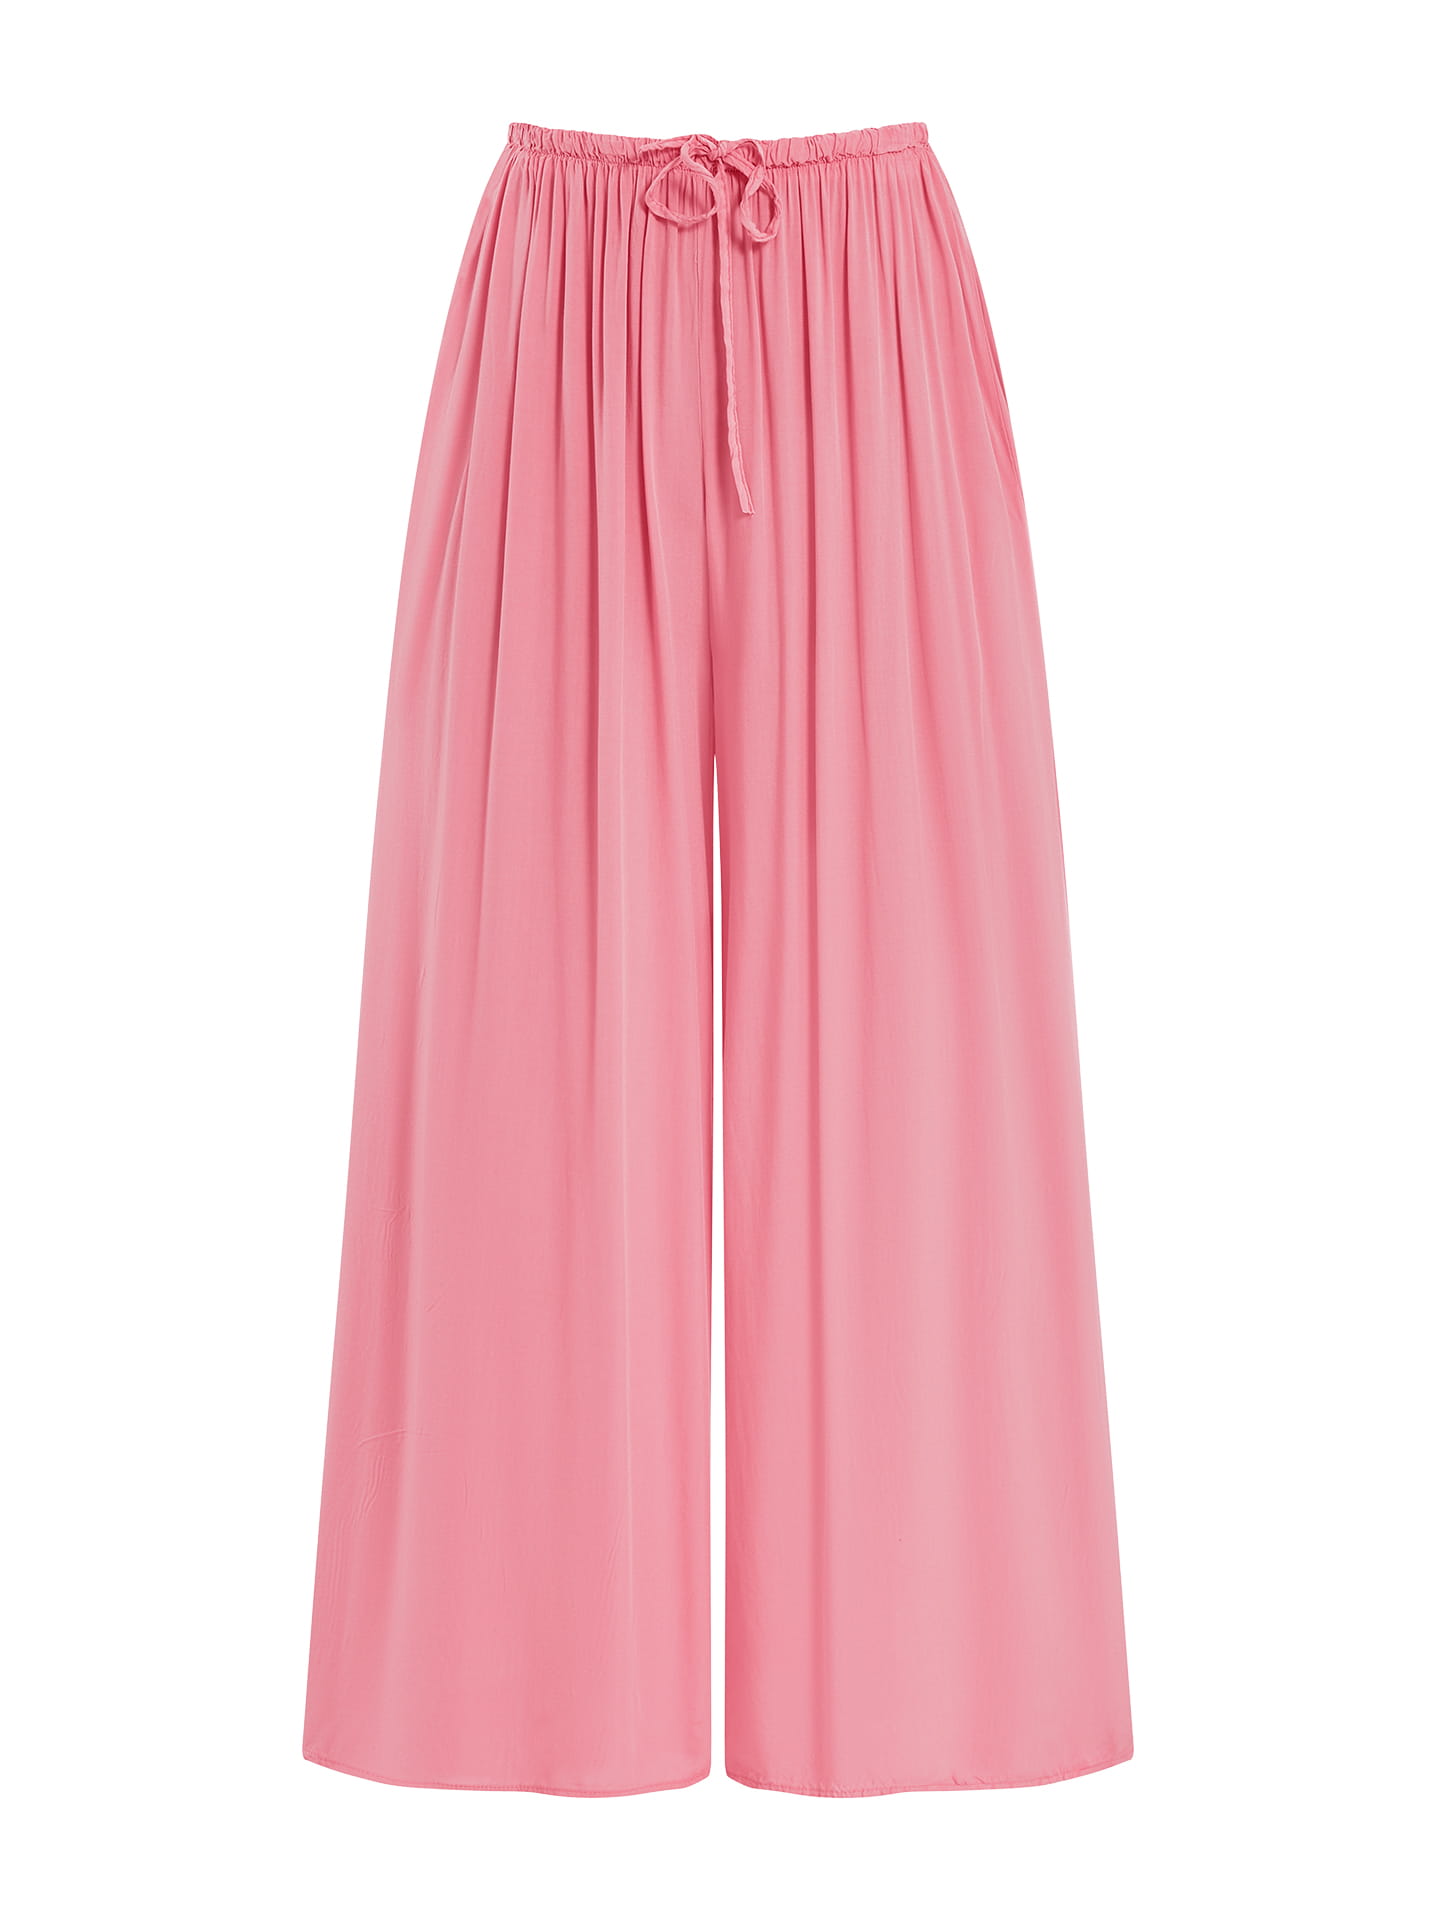 High waist wide leg trousers in pink, 12.99€